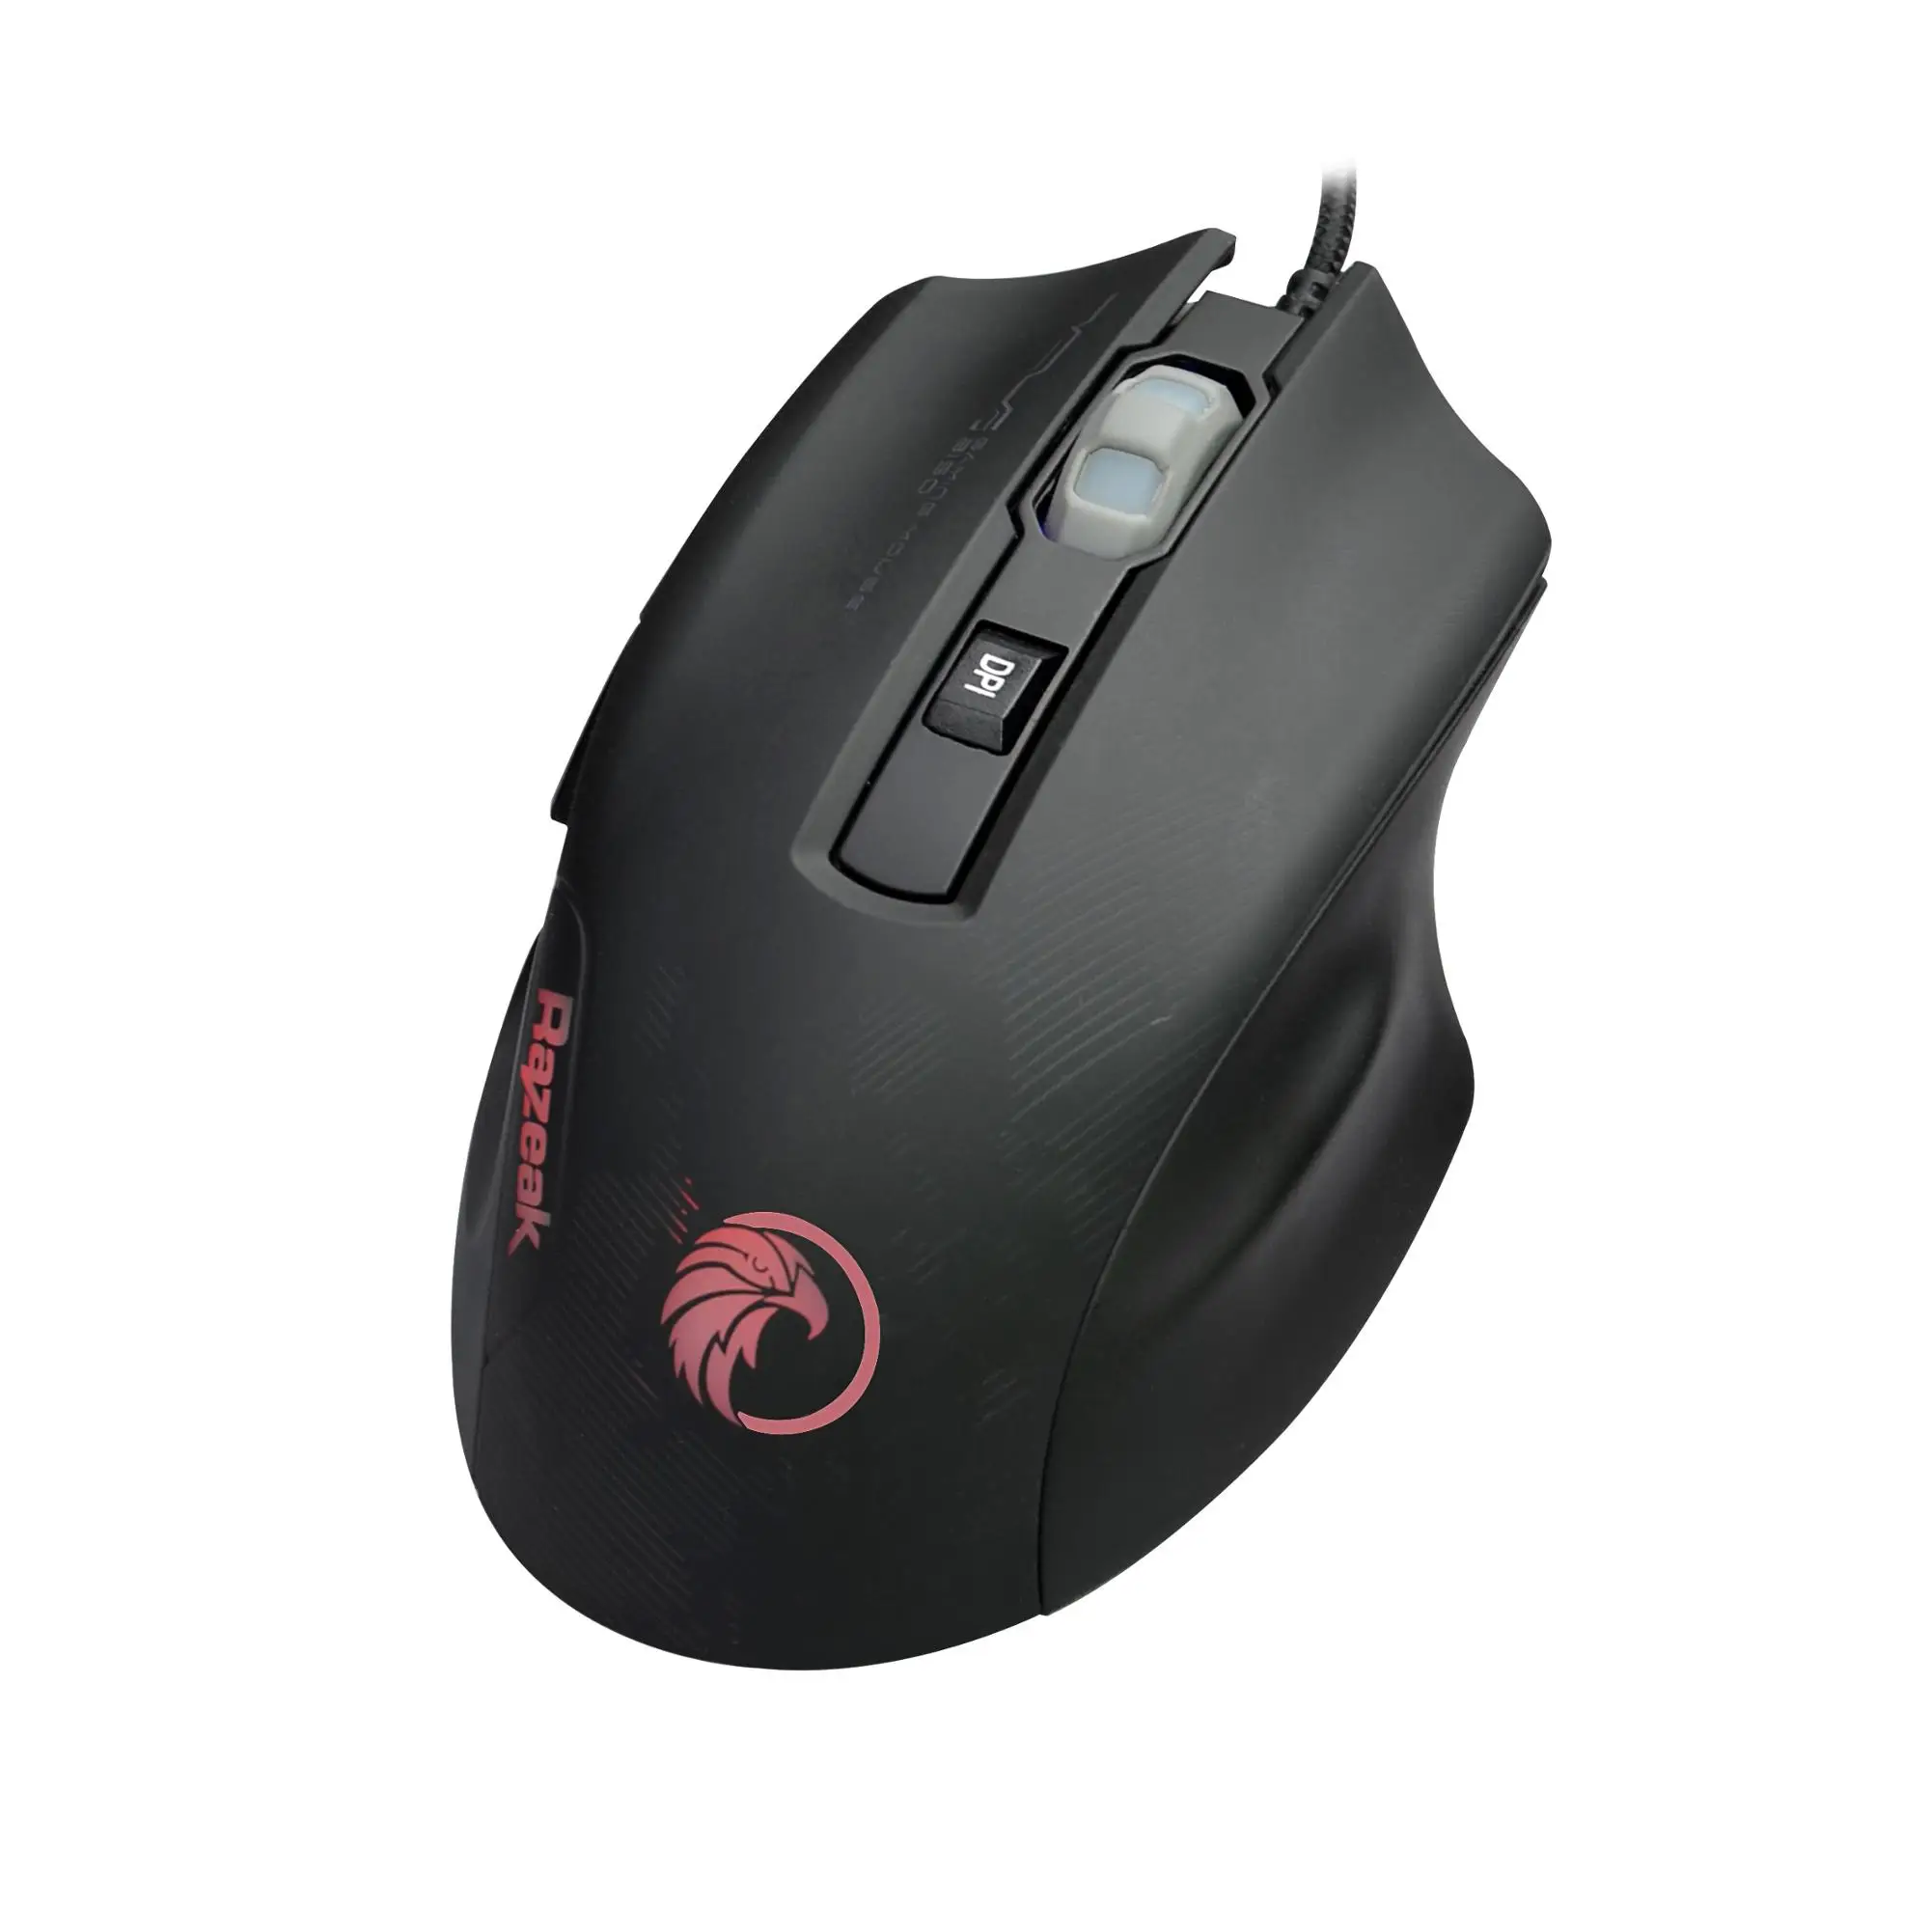 Cozy Which Brand Of Gaming Mouse Is The Best for Streamer